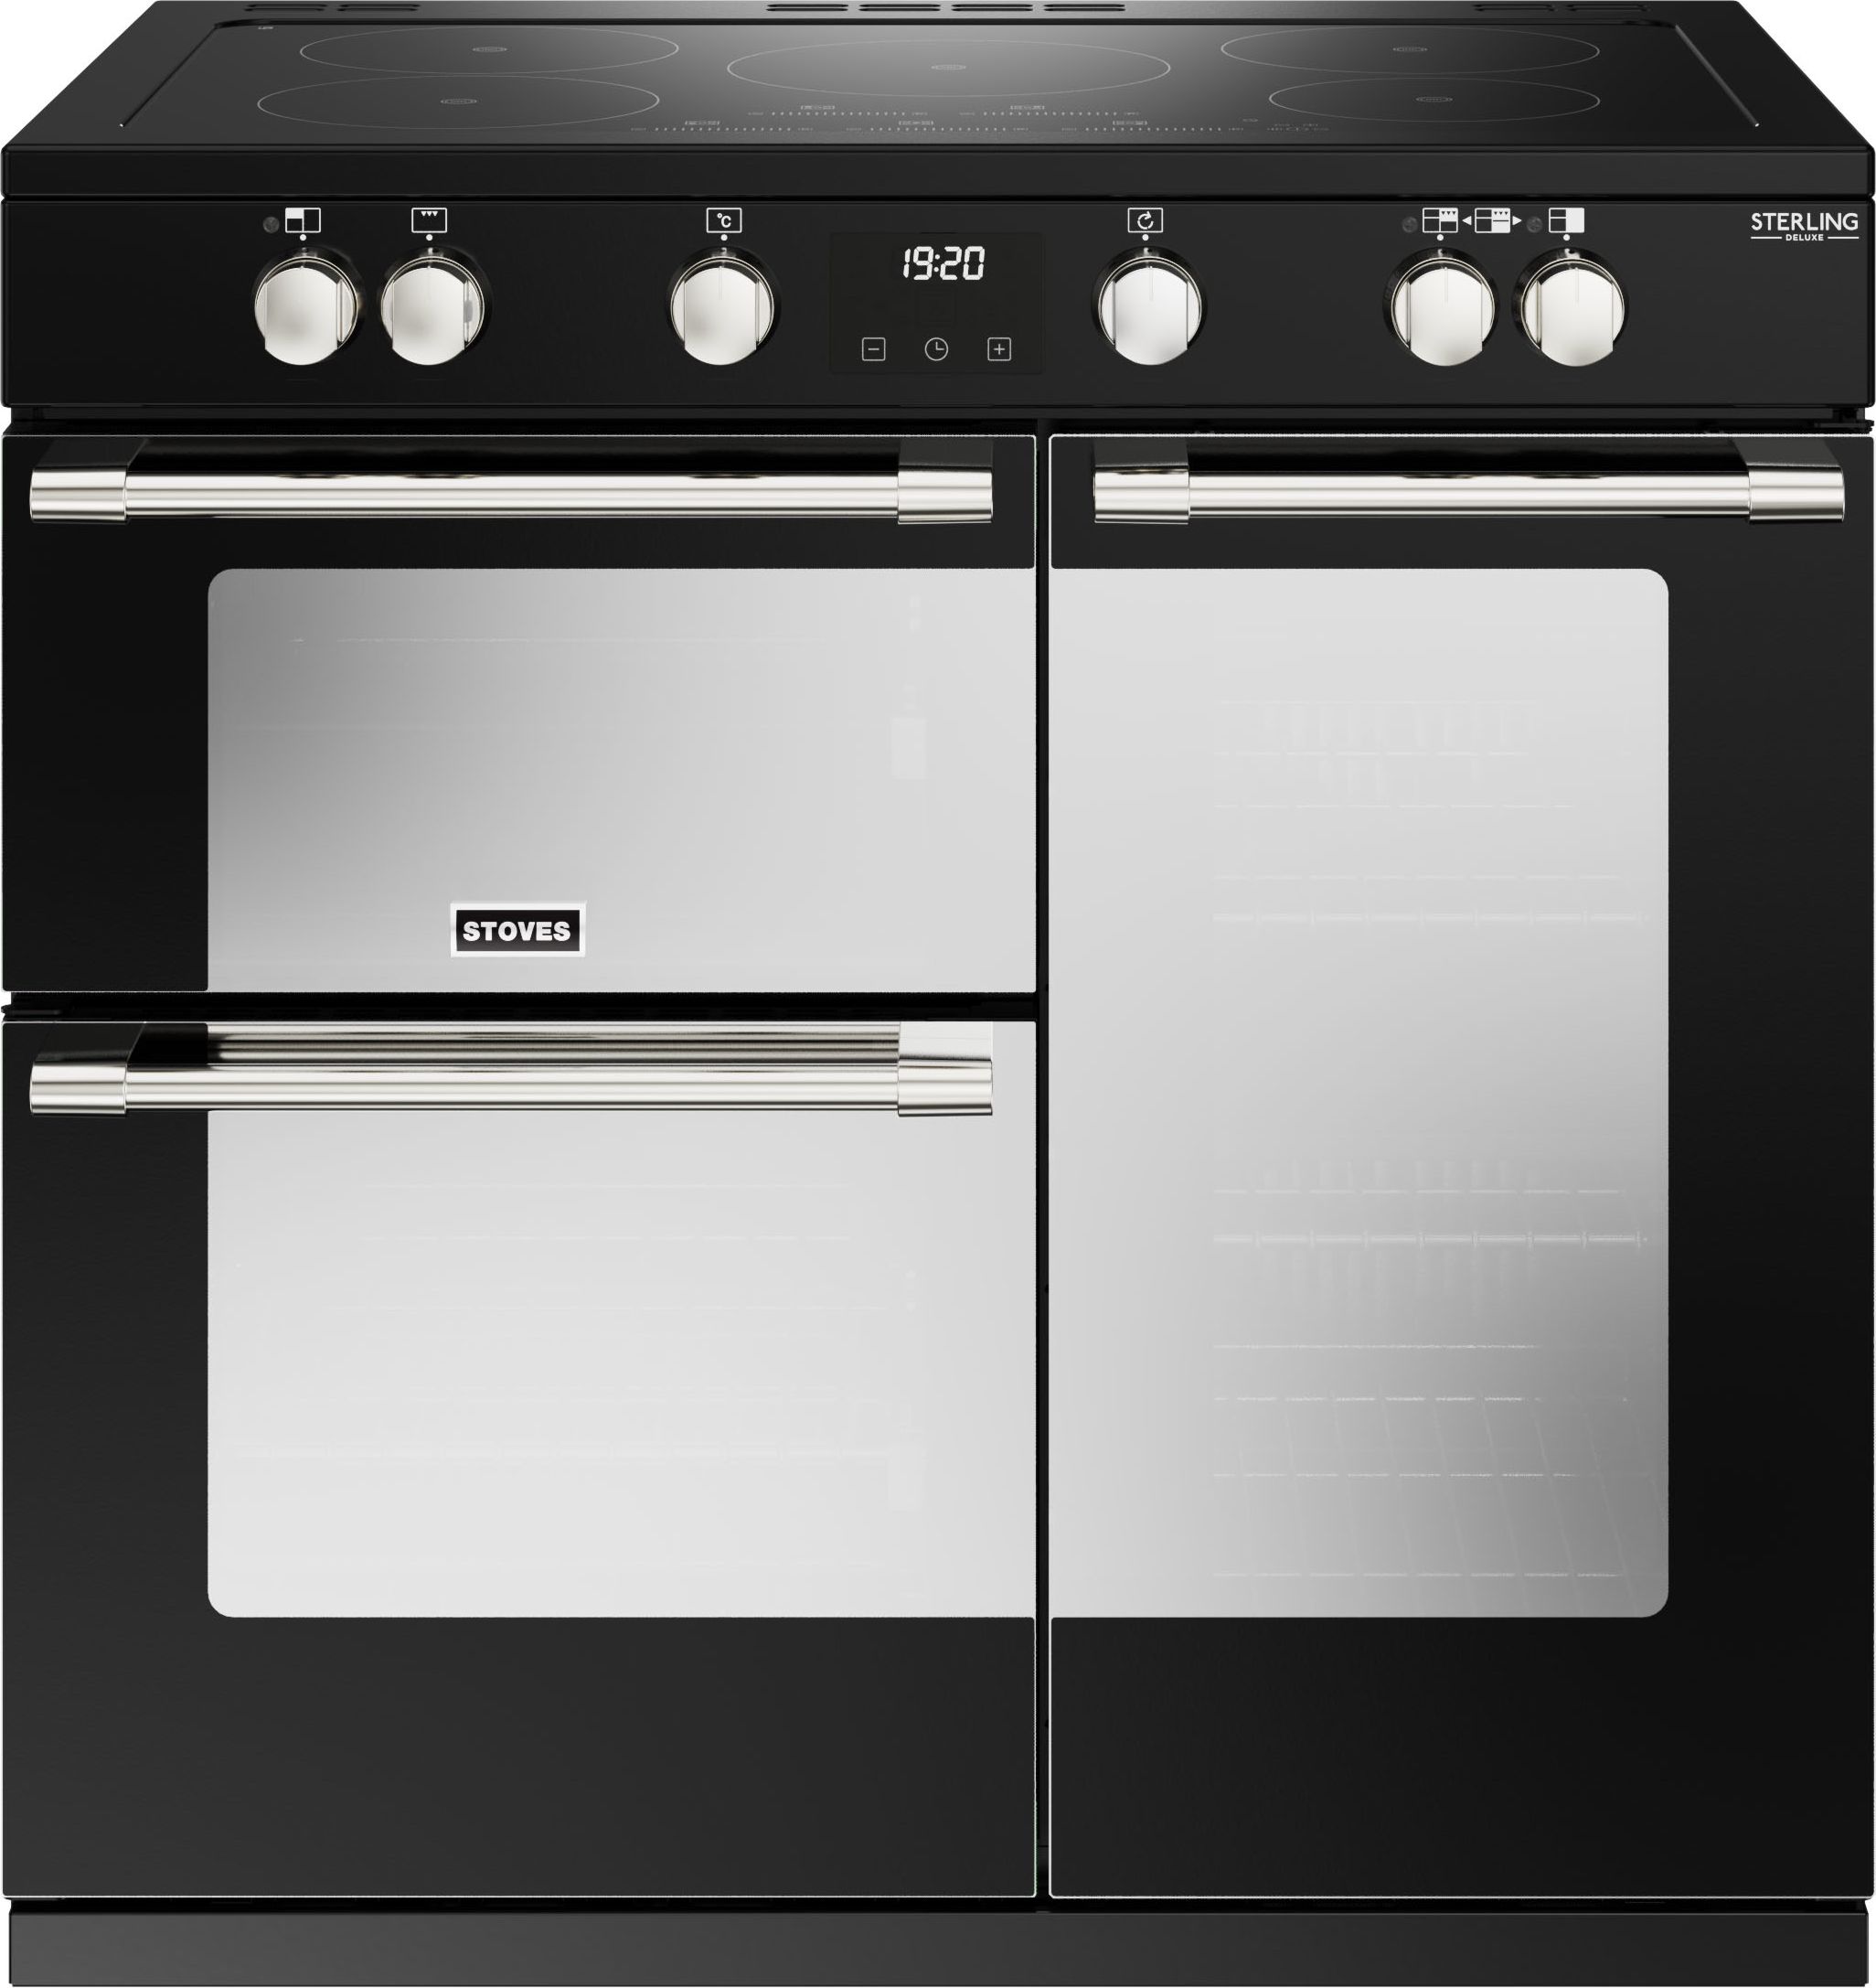 Stoves Sterling Deluxe ST DX STER D900Ei TCH BK 90cm Electric Range Cooker with Induction Hob - Black - A/A/A Rated, Black